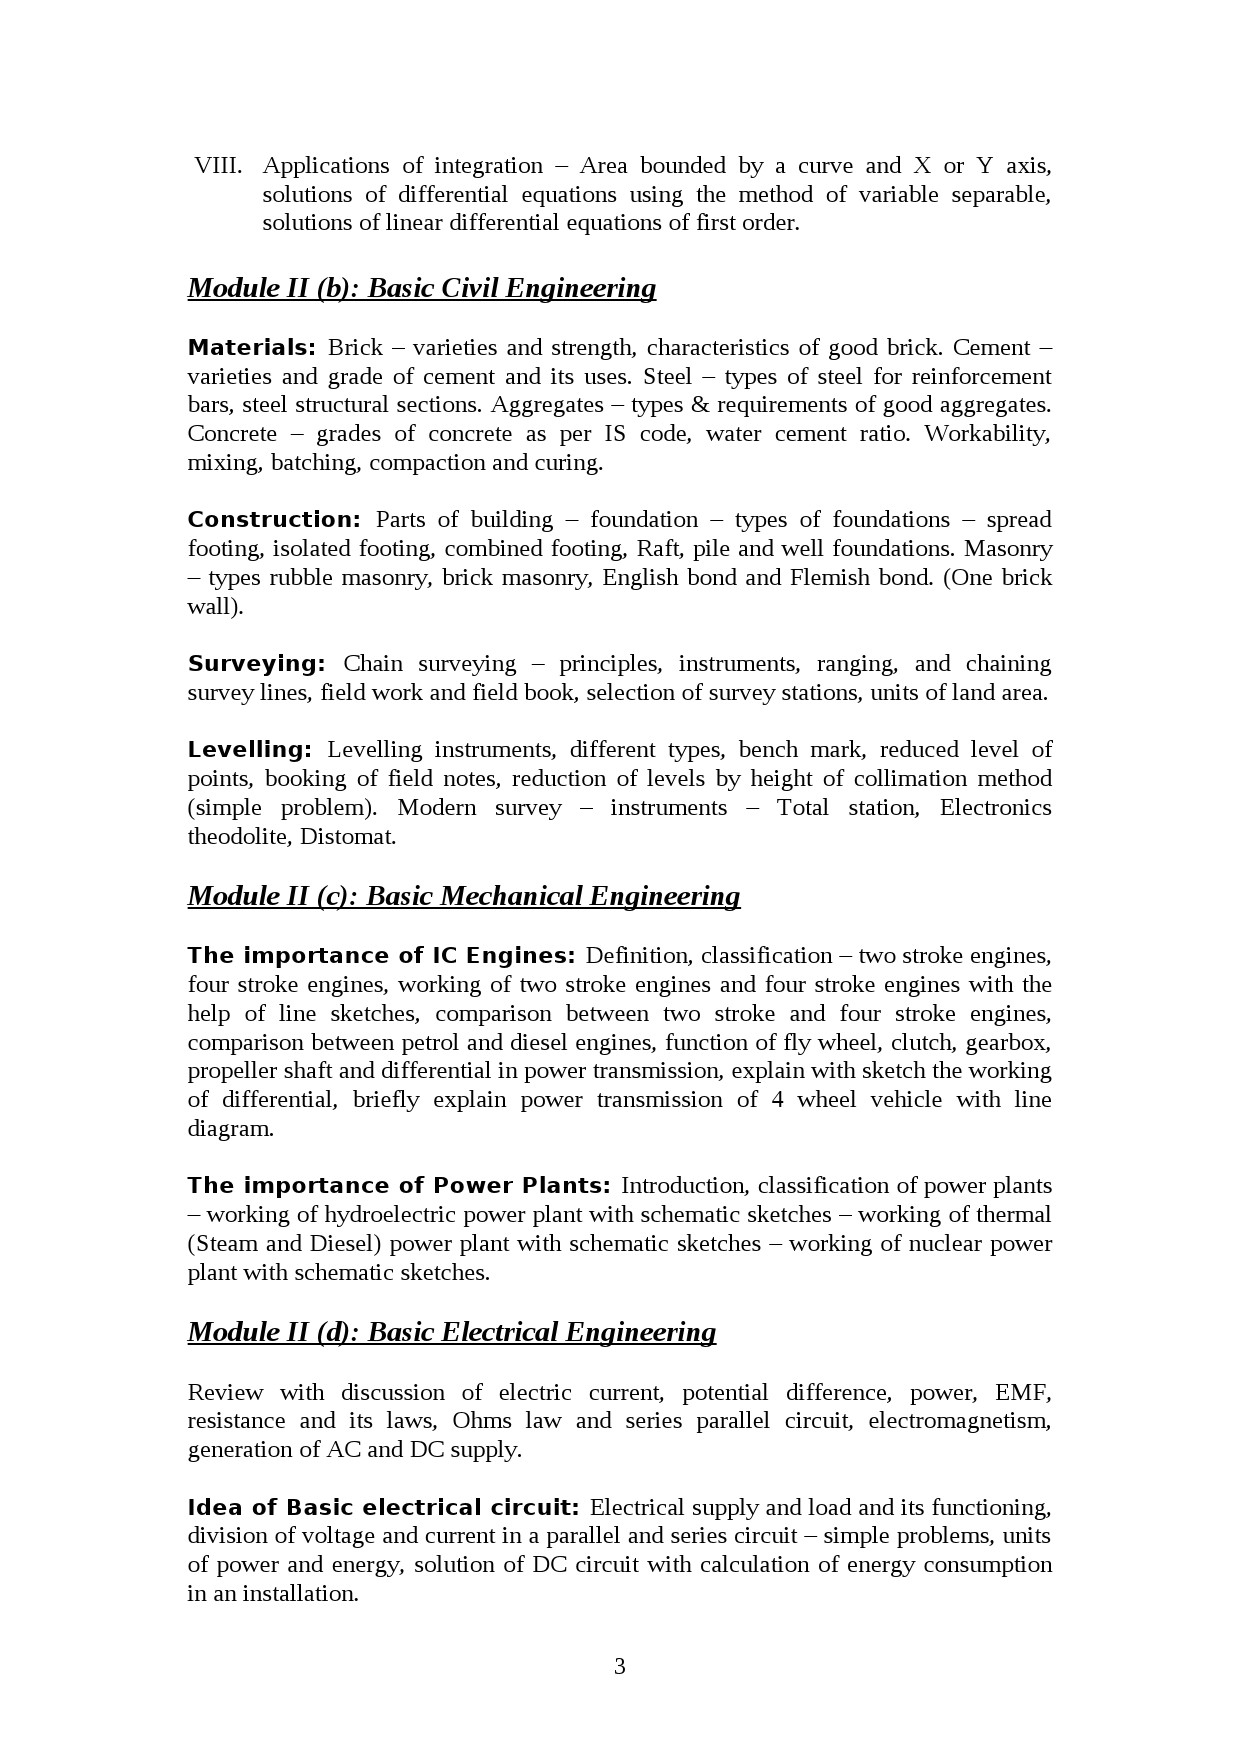 Automobile Engineering Lecturer in Polytechnic Exam Syllabus - Notification Image 3